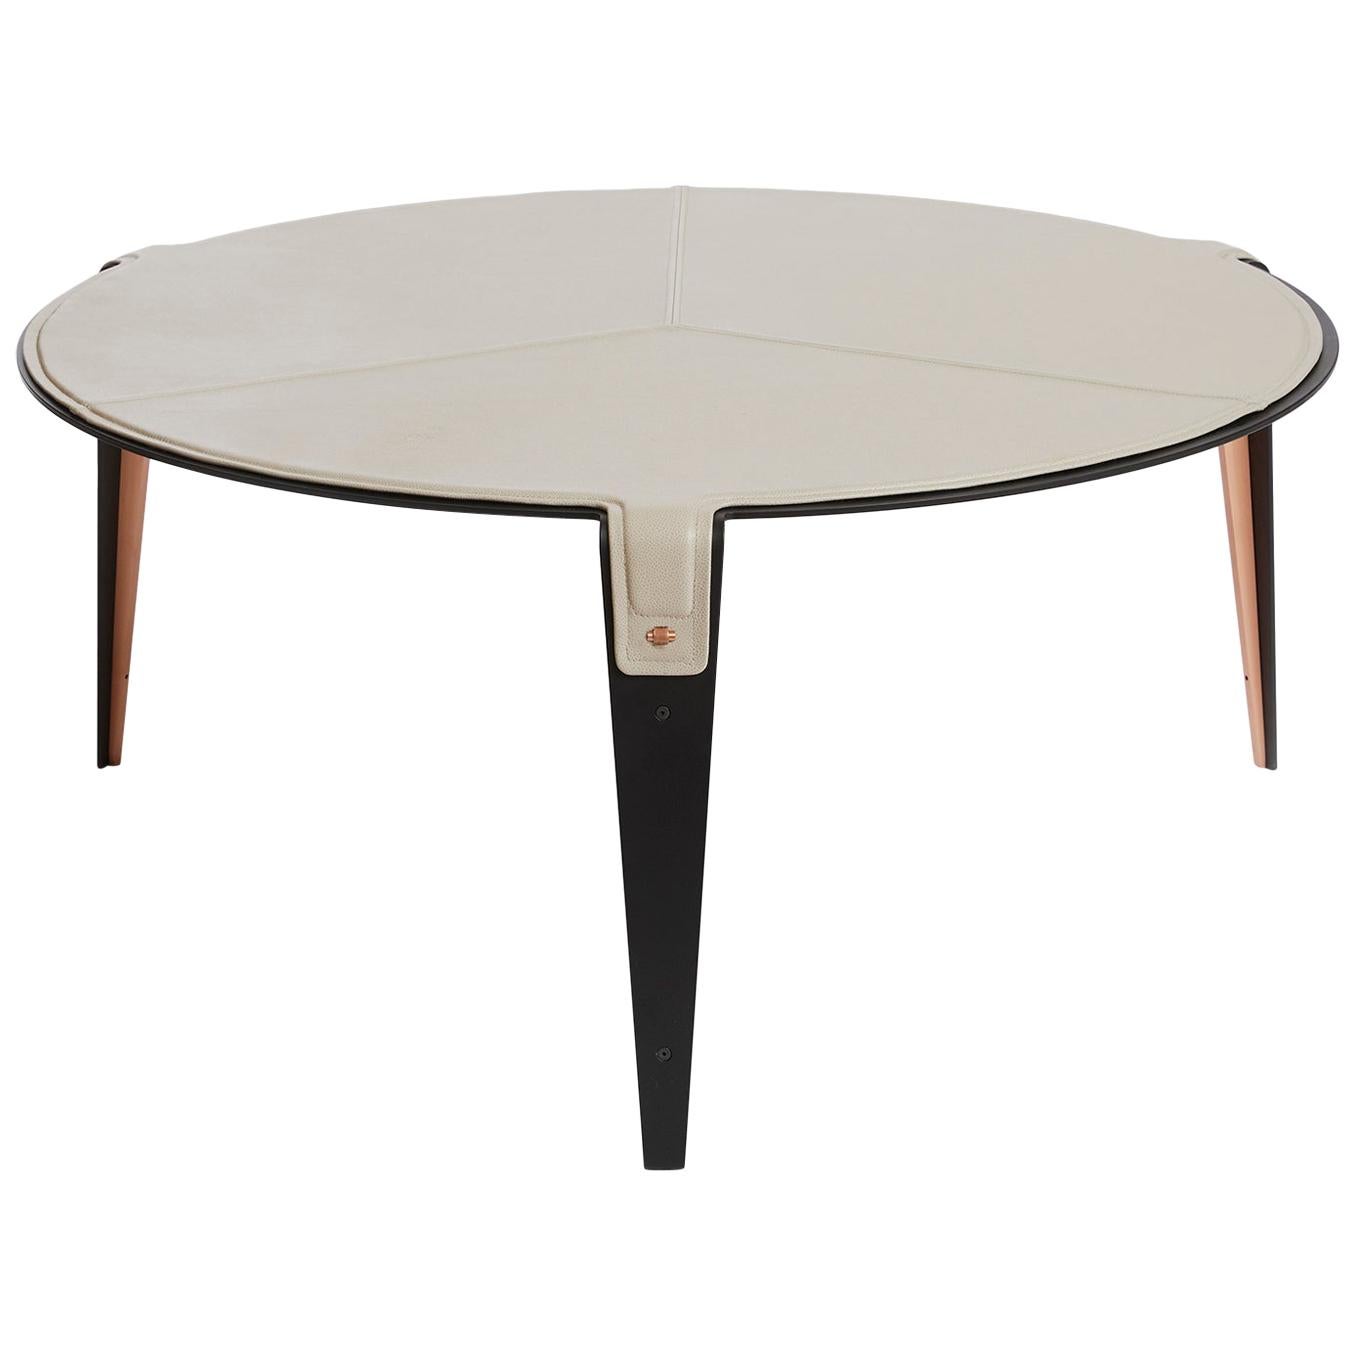 Pink (Nude Pink) Bardot Coffee Table with Leather Top and Satin Copper Hardware by Gabriel Scott